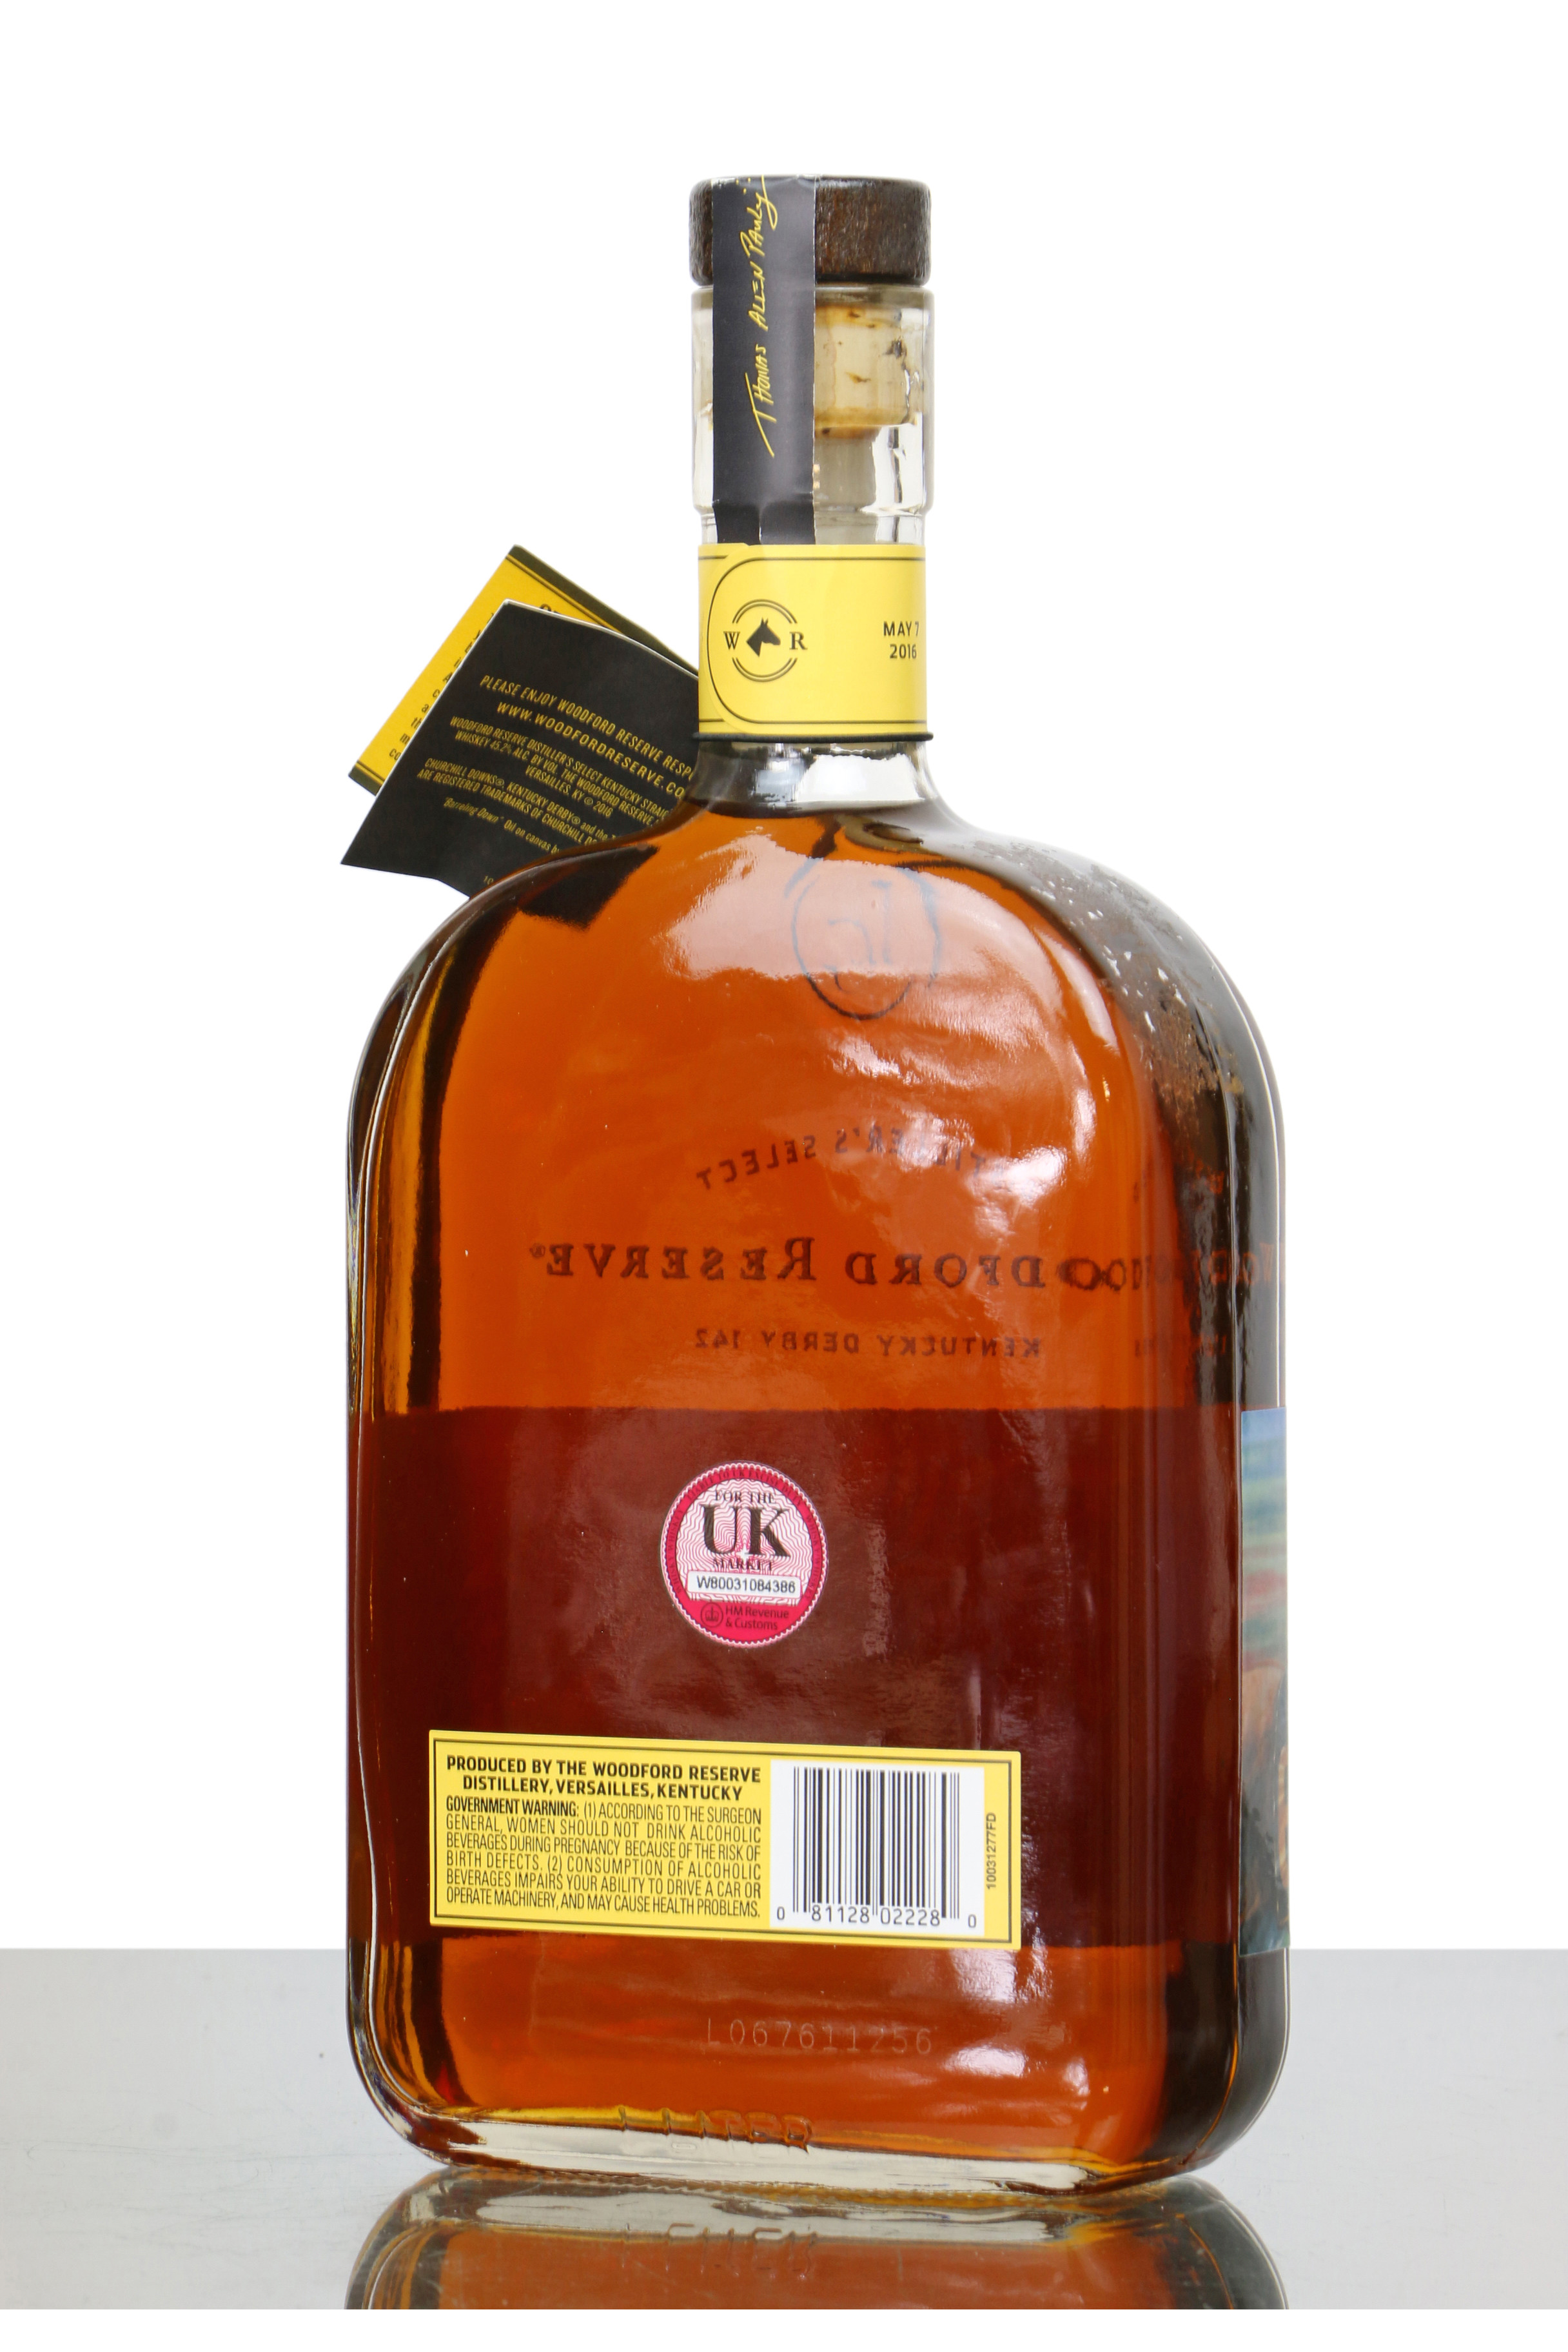 Woodford Reserve Bourbon Kentucky Derby 142 (1 Litre) Just Whisky